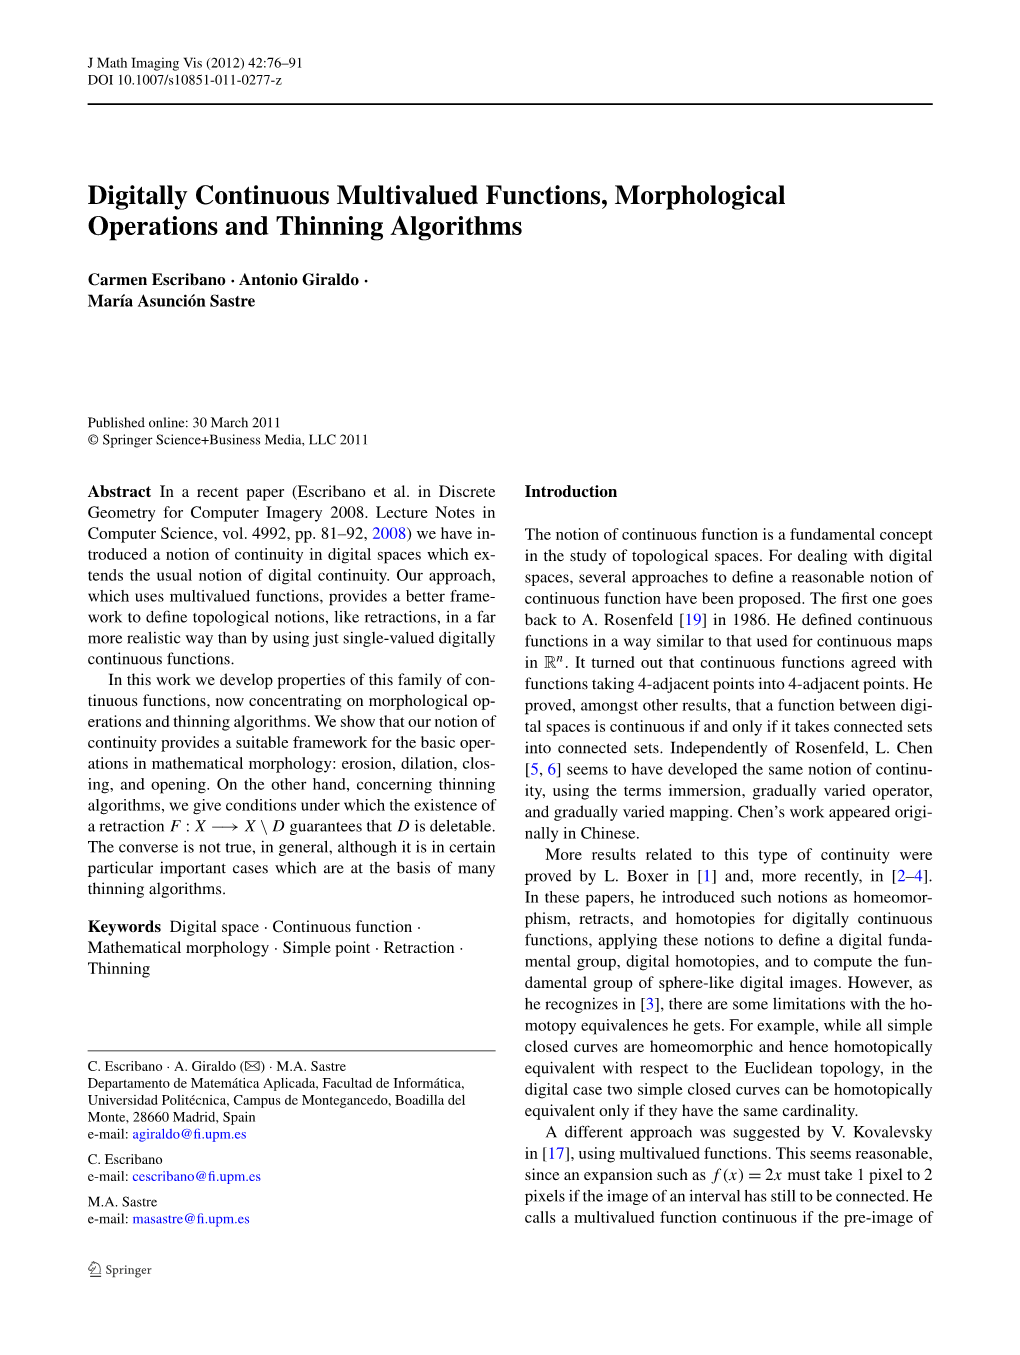 Digitally Continuous Multivalued Functions, Morphological Operations and Thinning Algorithms